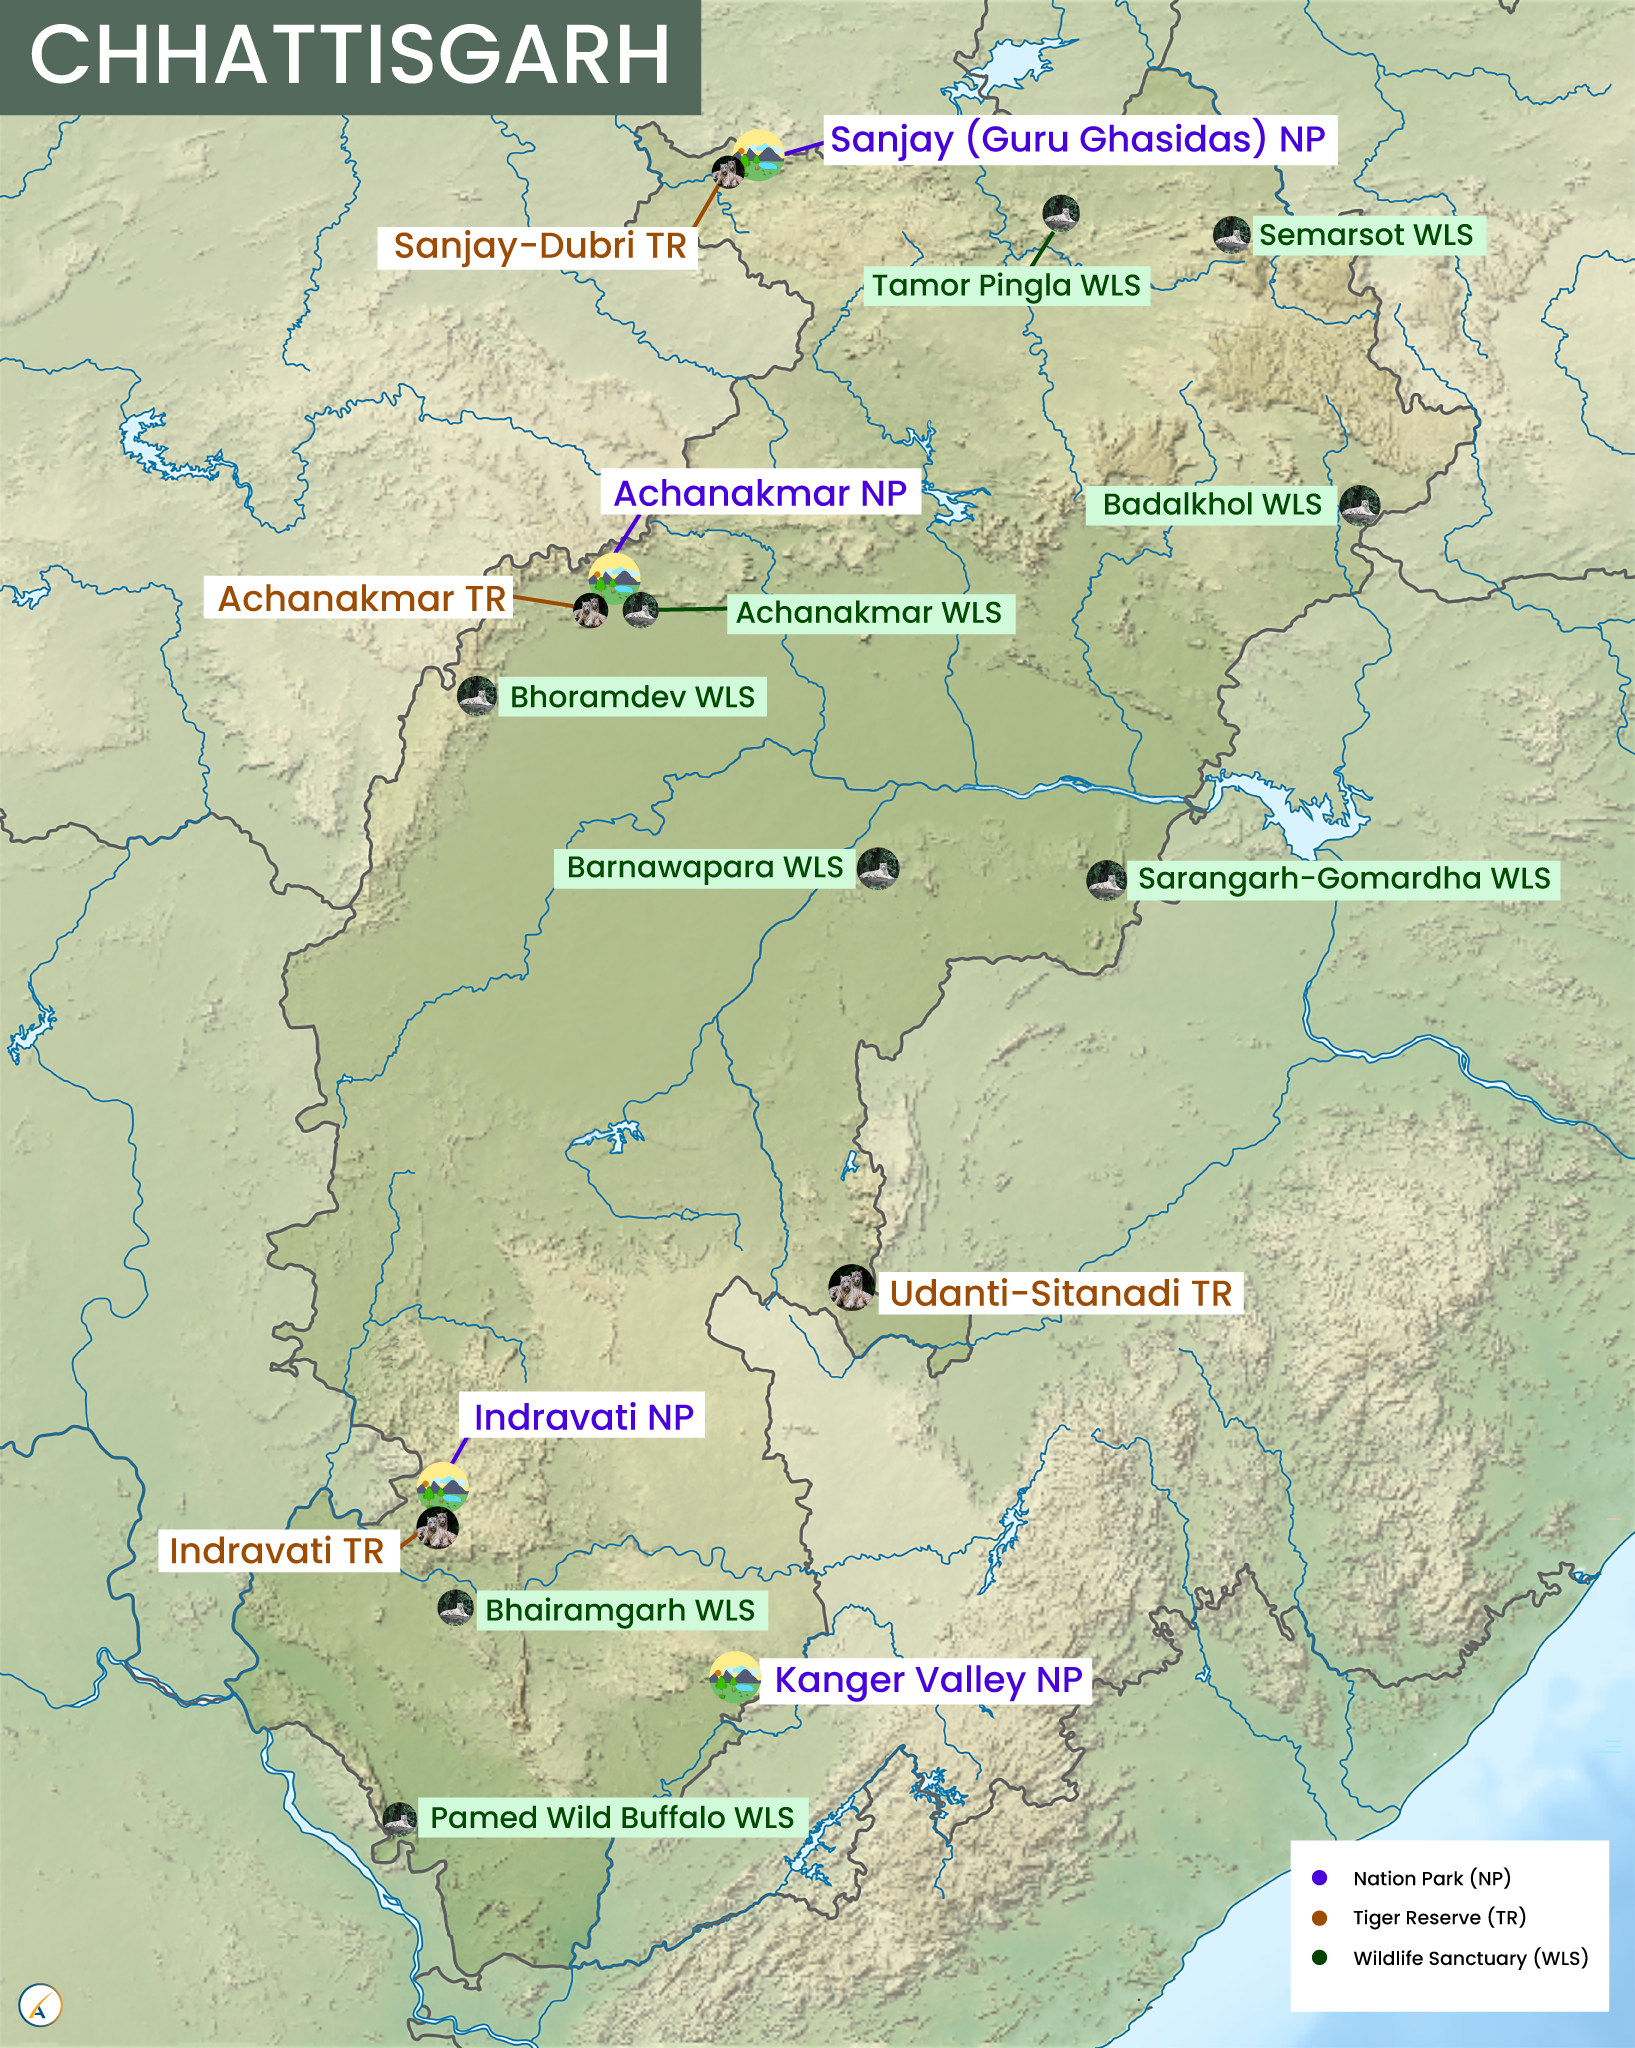 Chhattisgarh National Parks, Tiger Reserves and Wildlife Sanctuaries Map